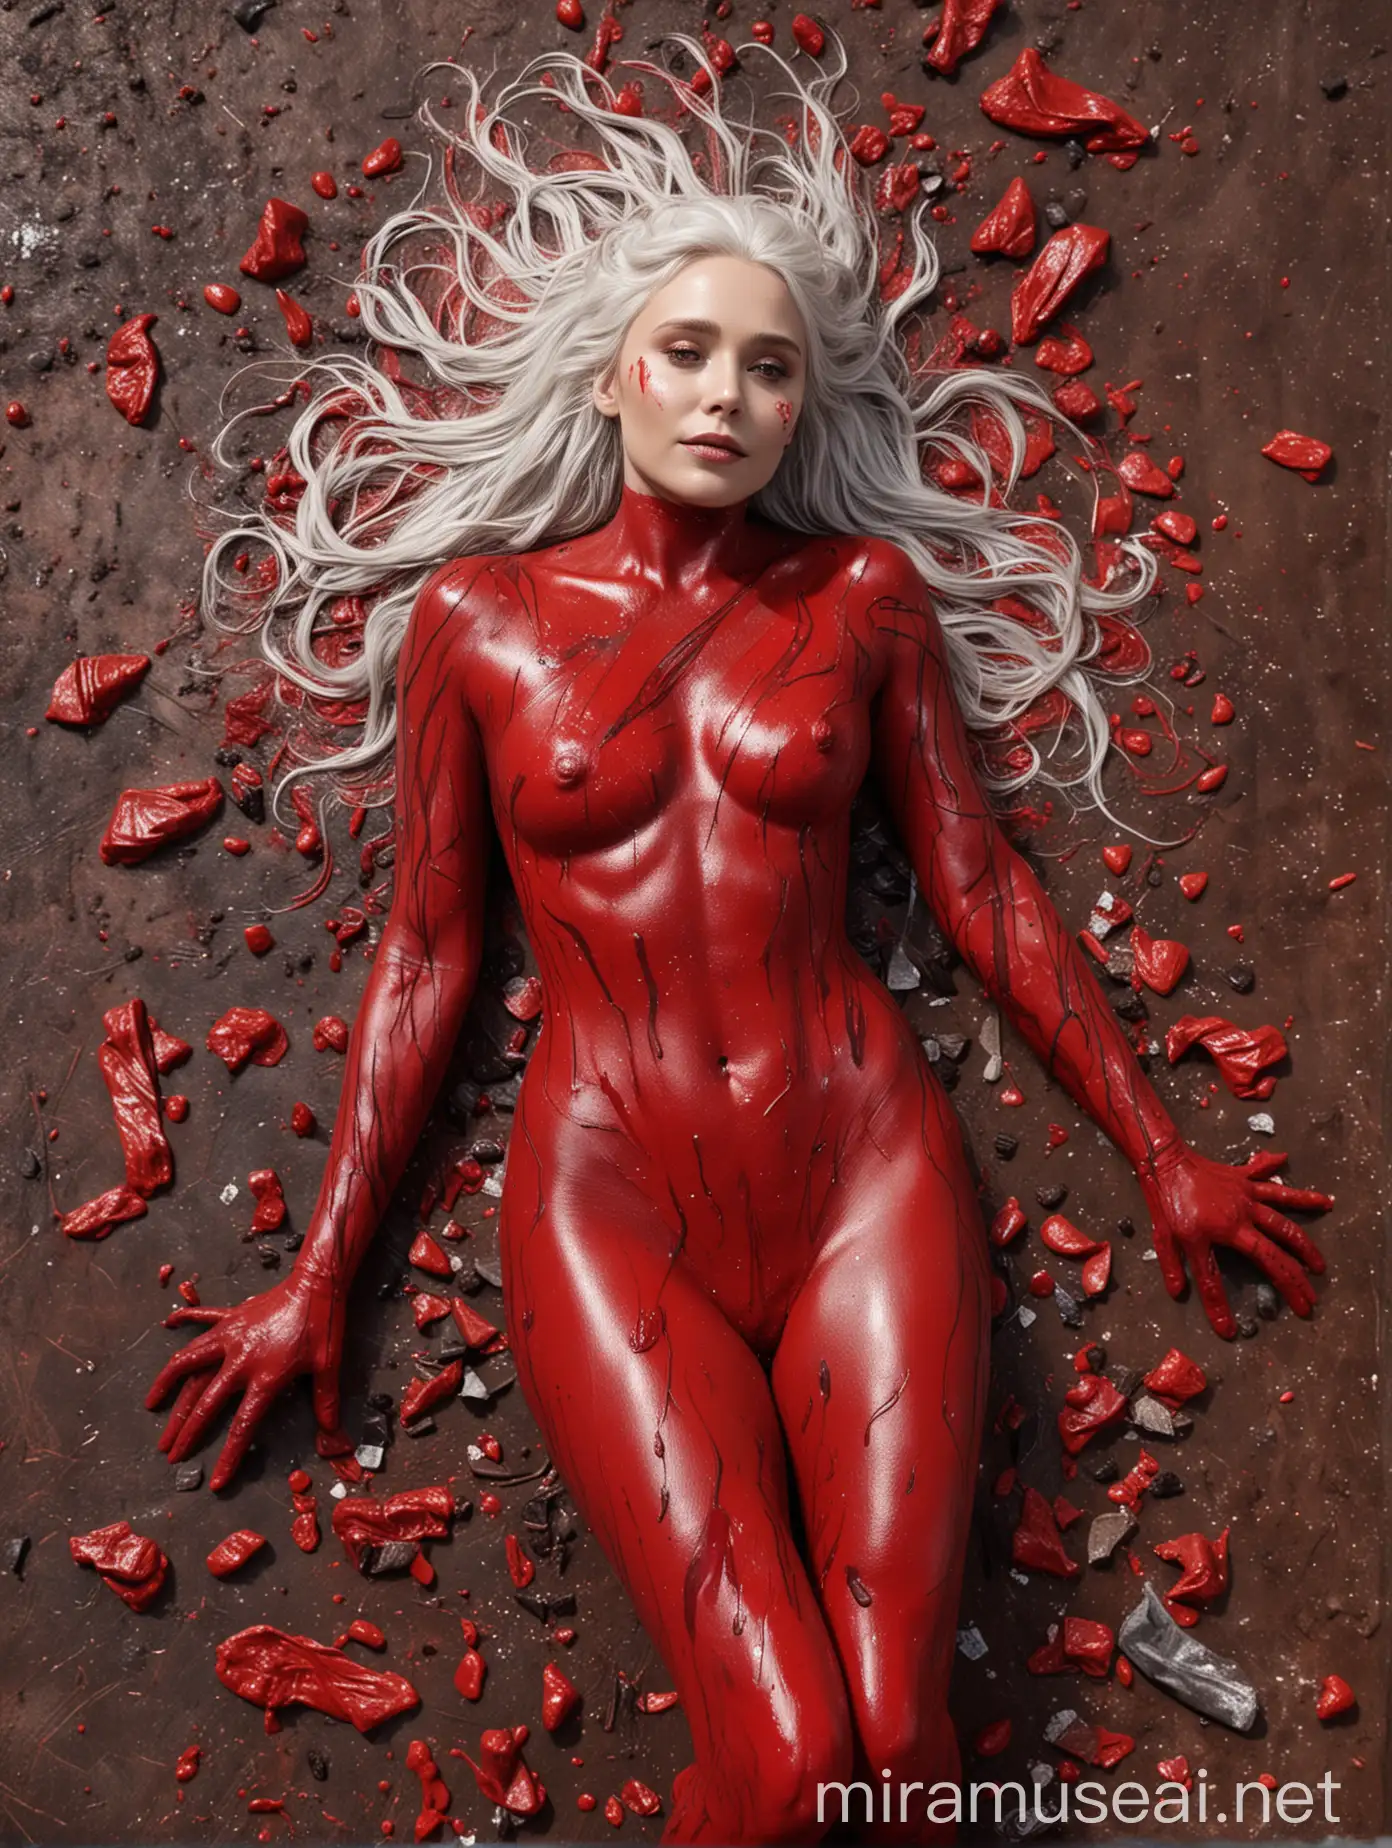 Elizabeth Olsen full body paint red
Red paint on her
Trash in the background 
The body paint is red that gradually fuses with black
Tomato sauce all over her
In the background melterd chocolate 
Glossy paint
She is laying on the ground
 white hair